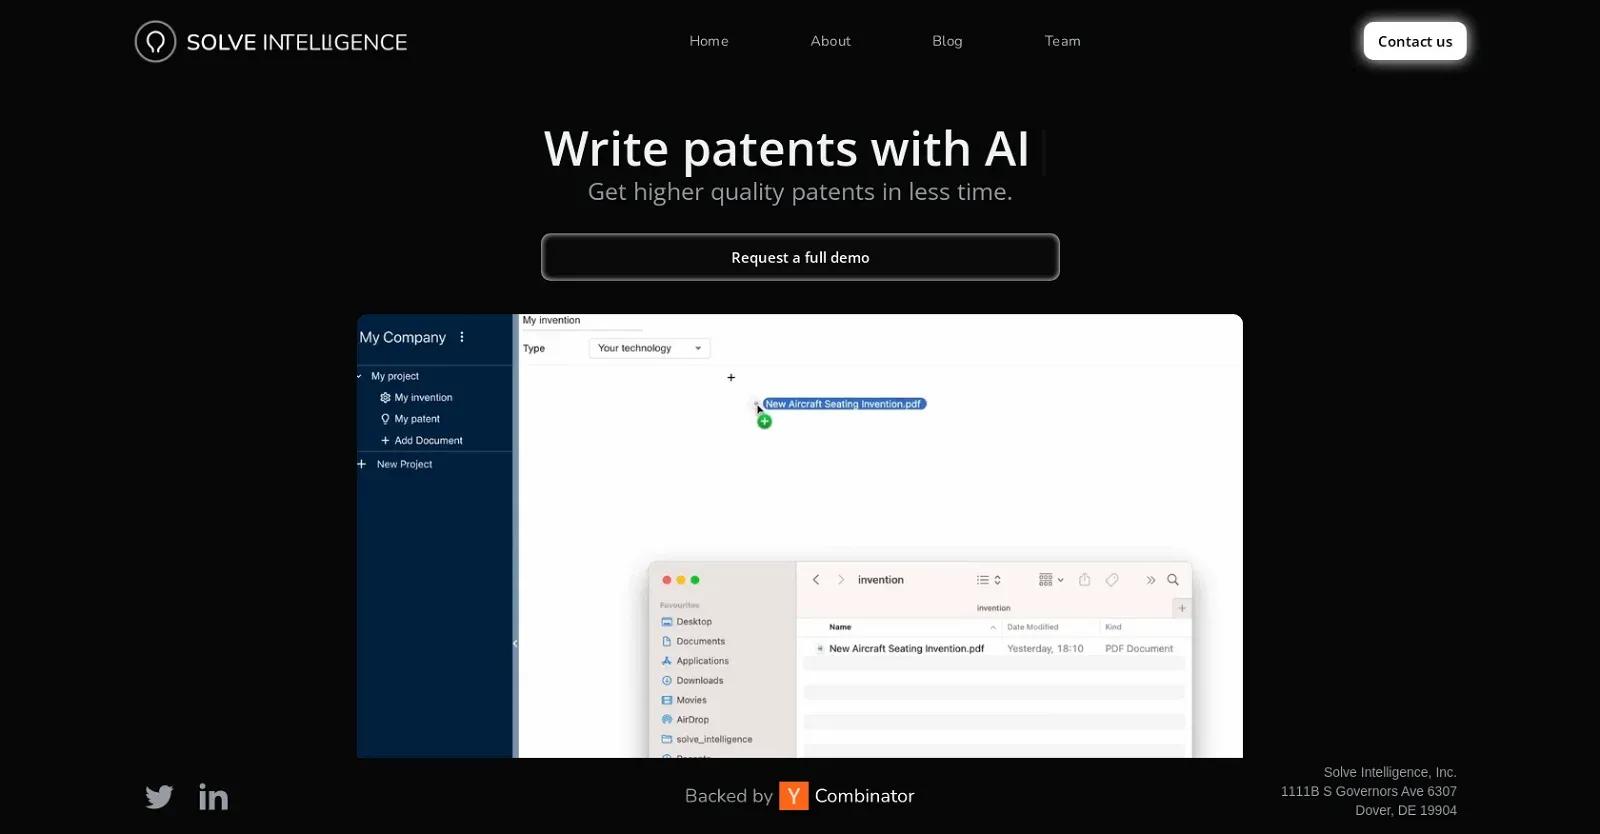 Solve Intelligence - Write patents with AI